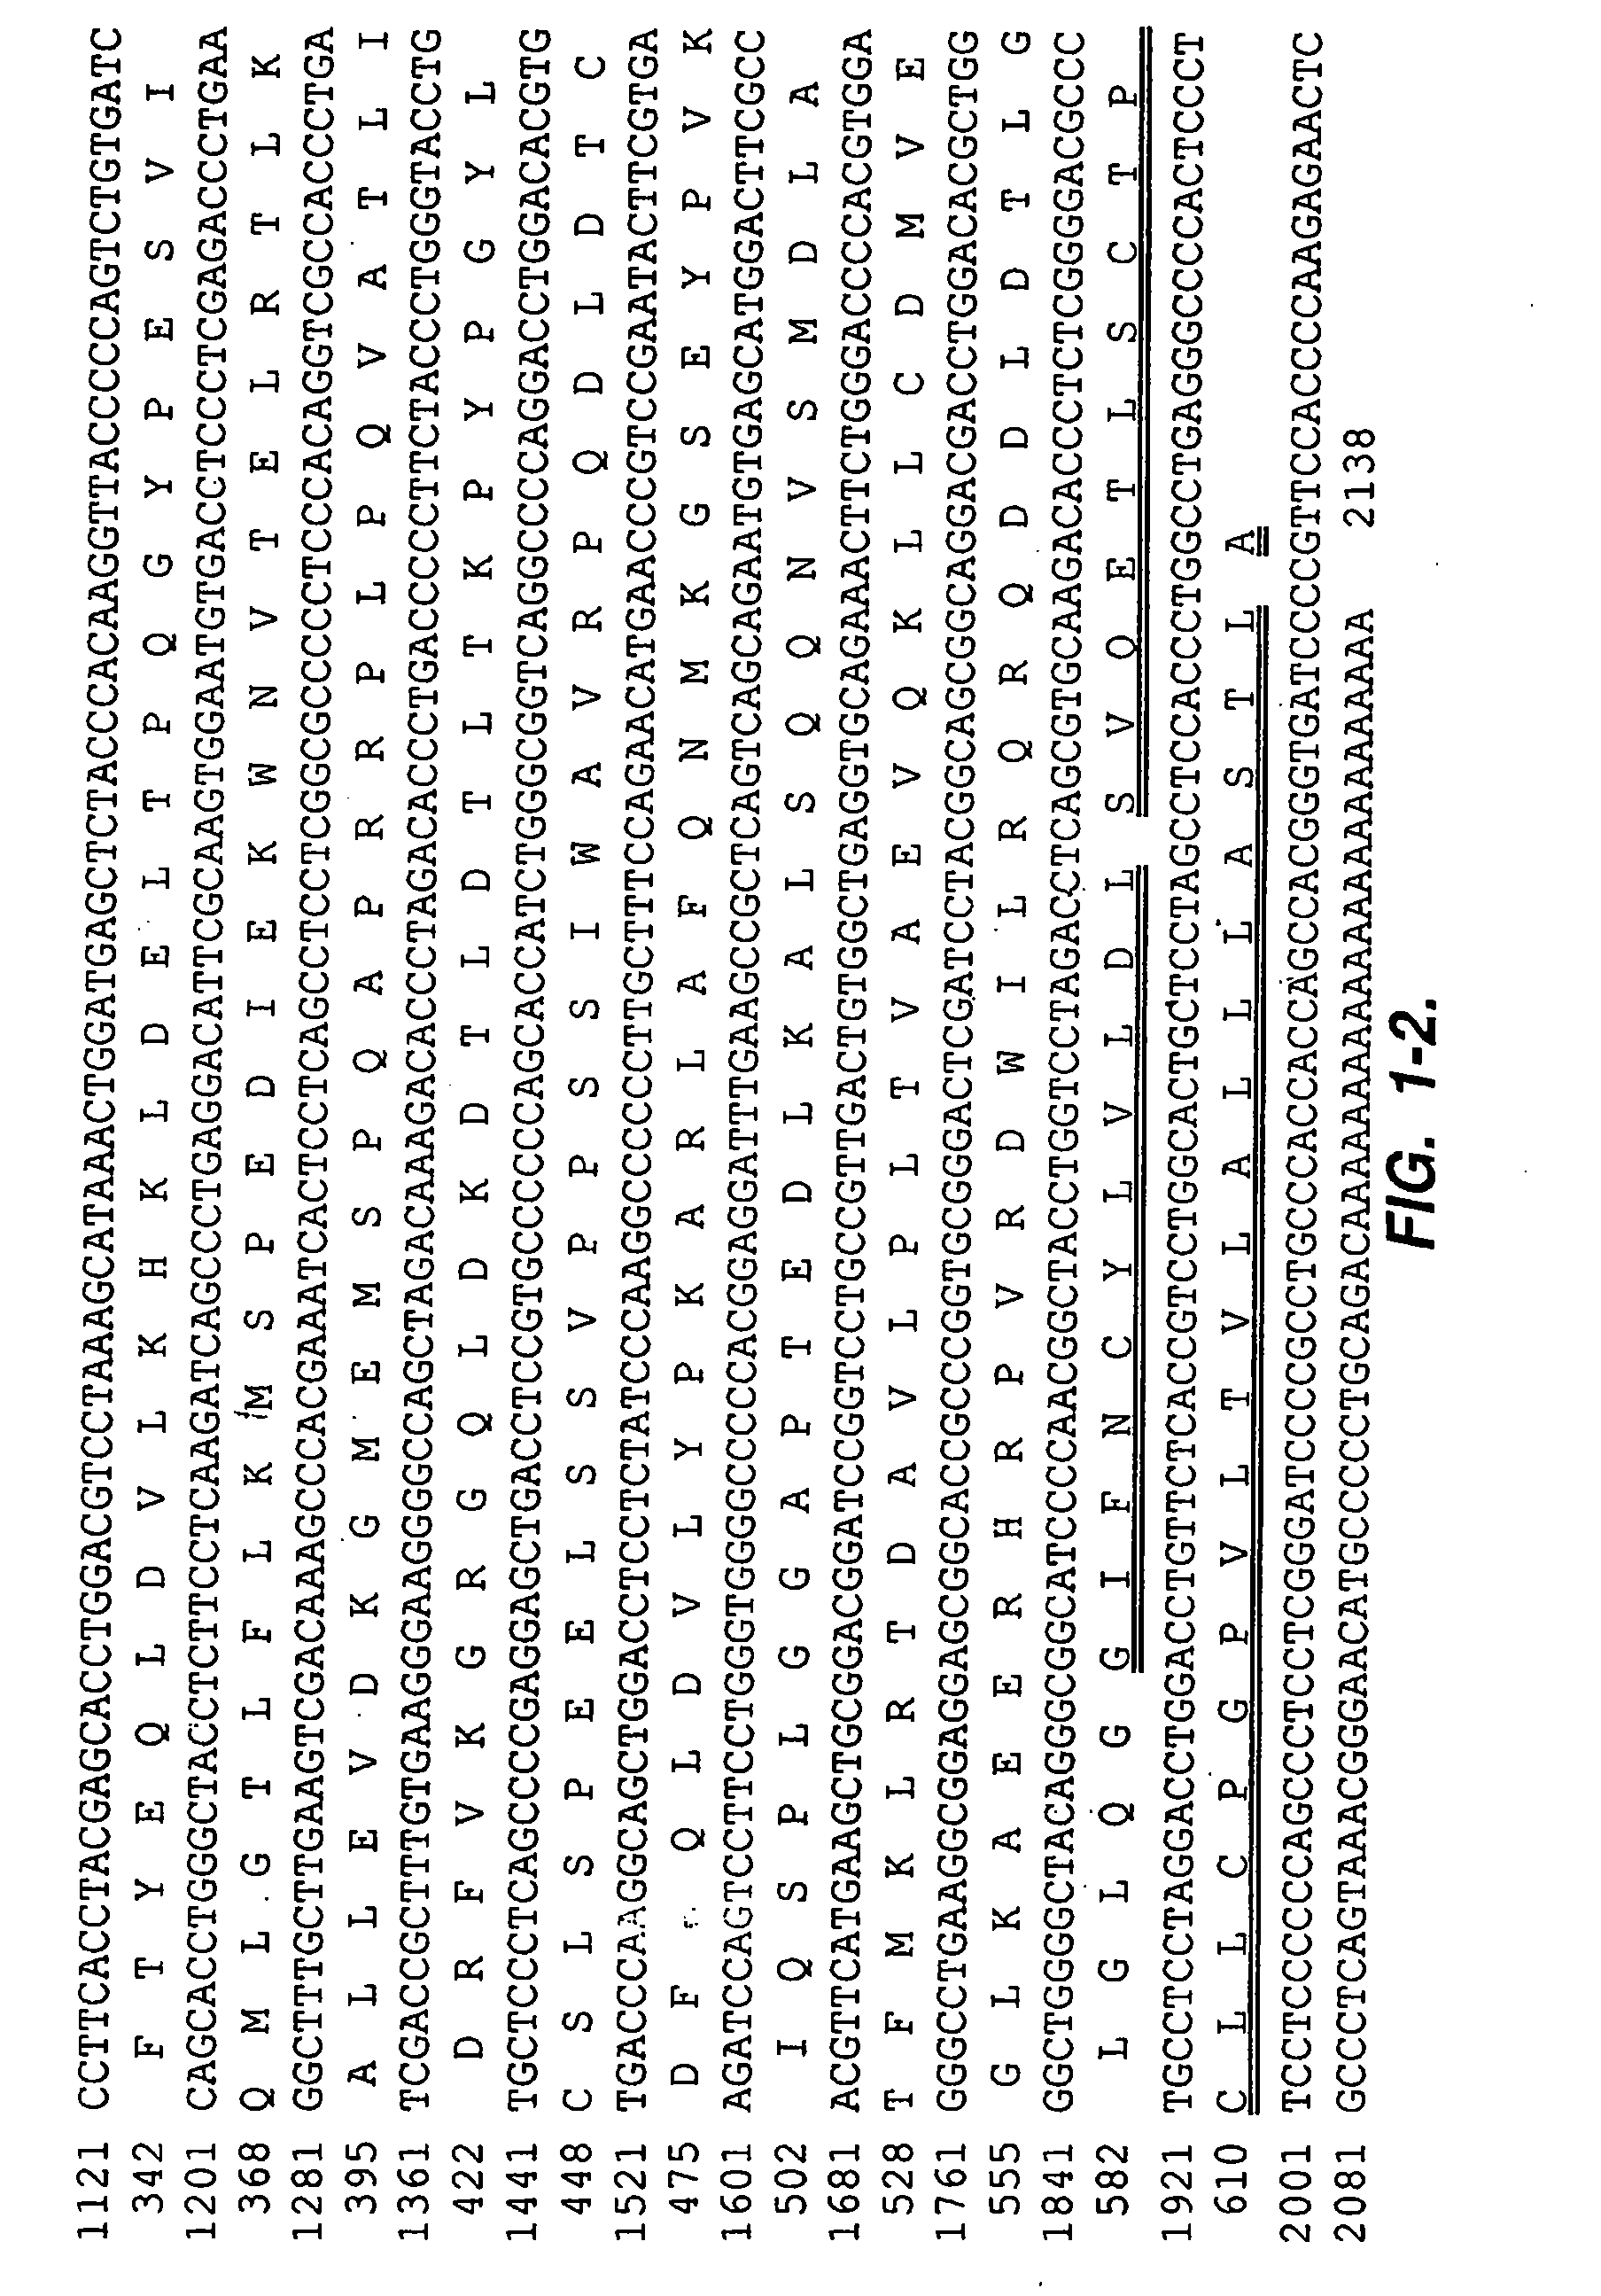 Mesothelin, A Differentiation Antigen Present On Mesothelium, Mesotheliomas, and Ovarian Cancers and Methods and Kits for Targeting the Antigen